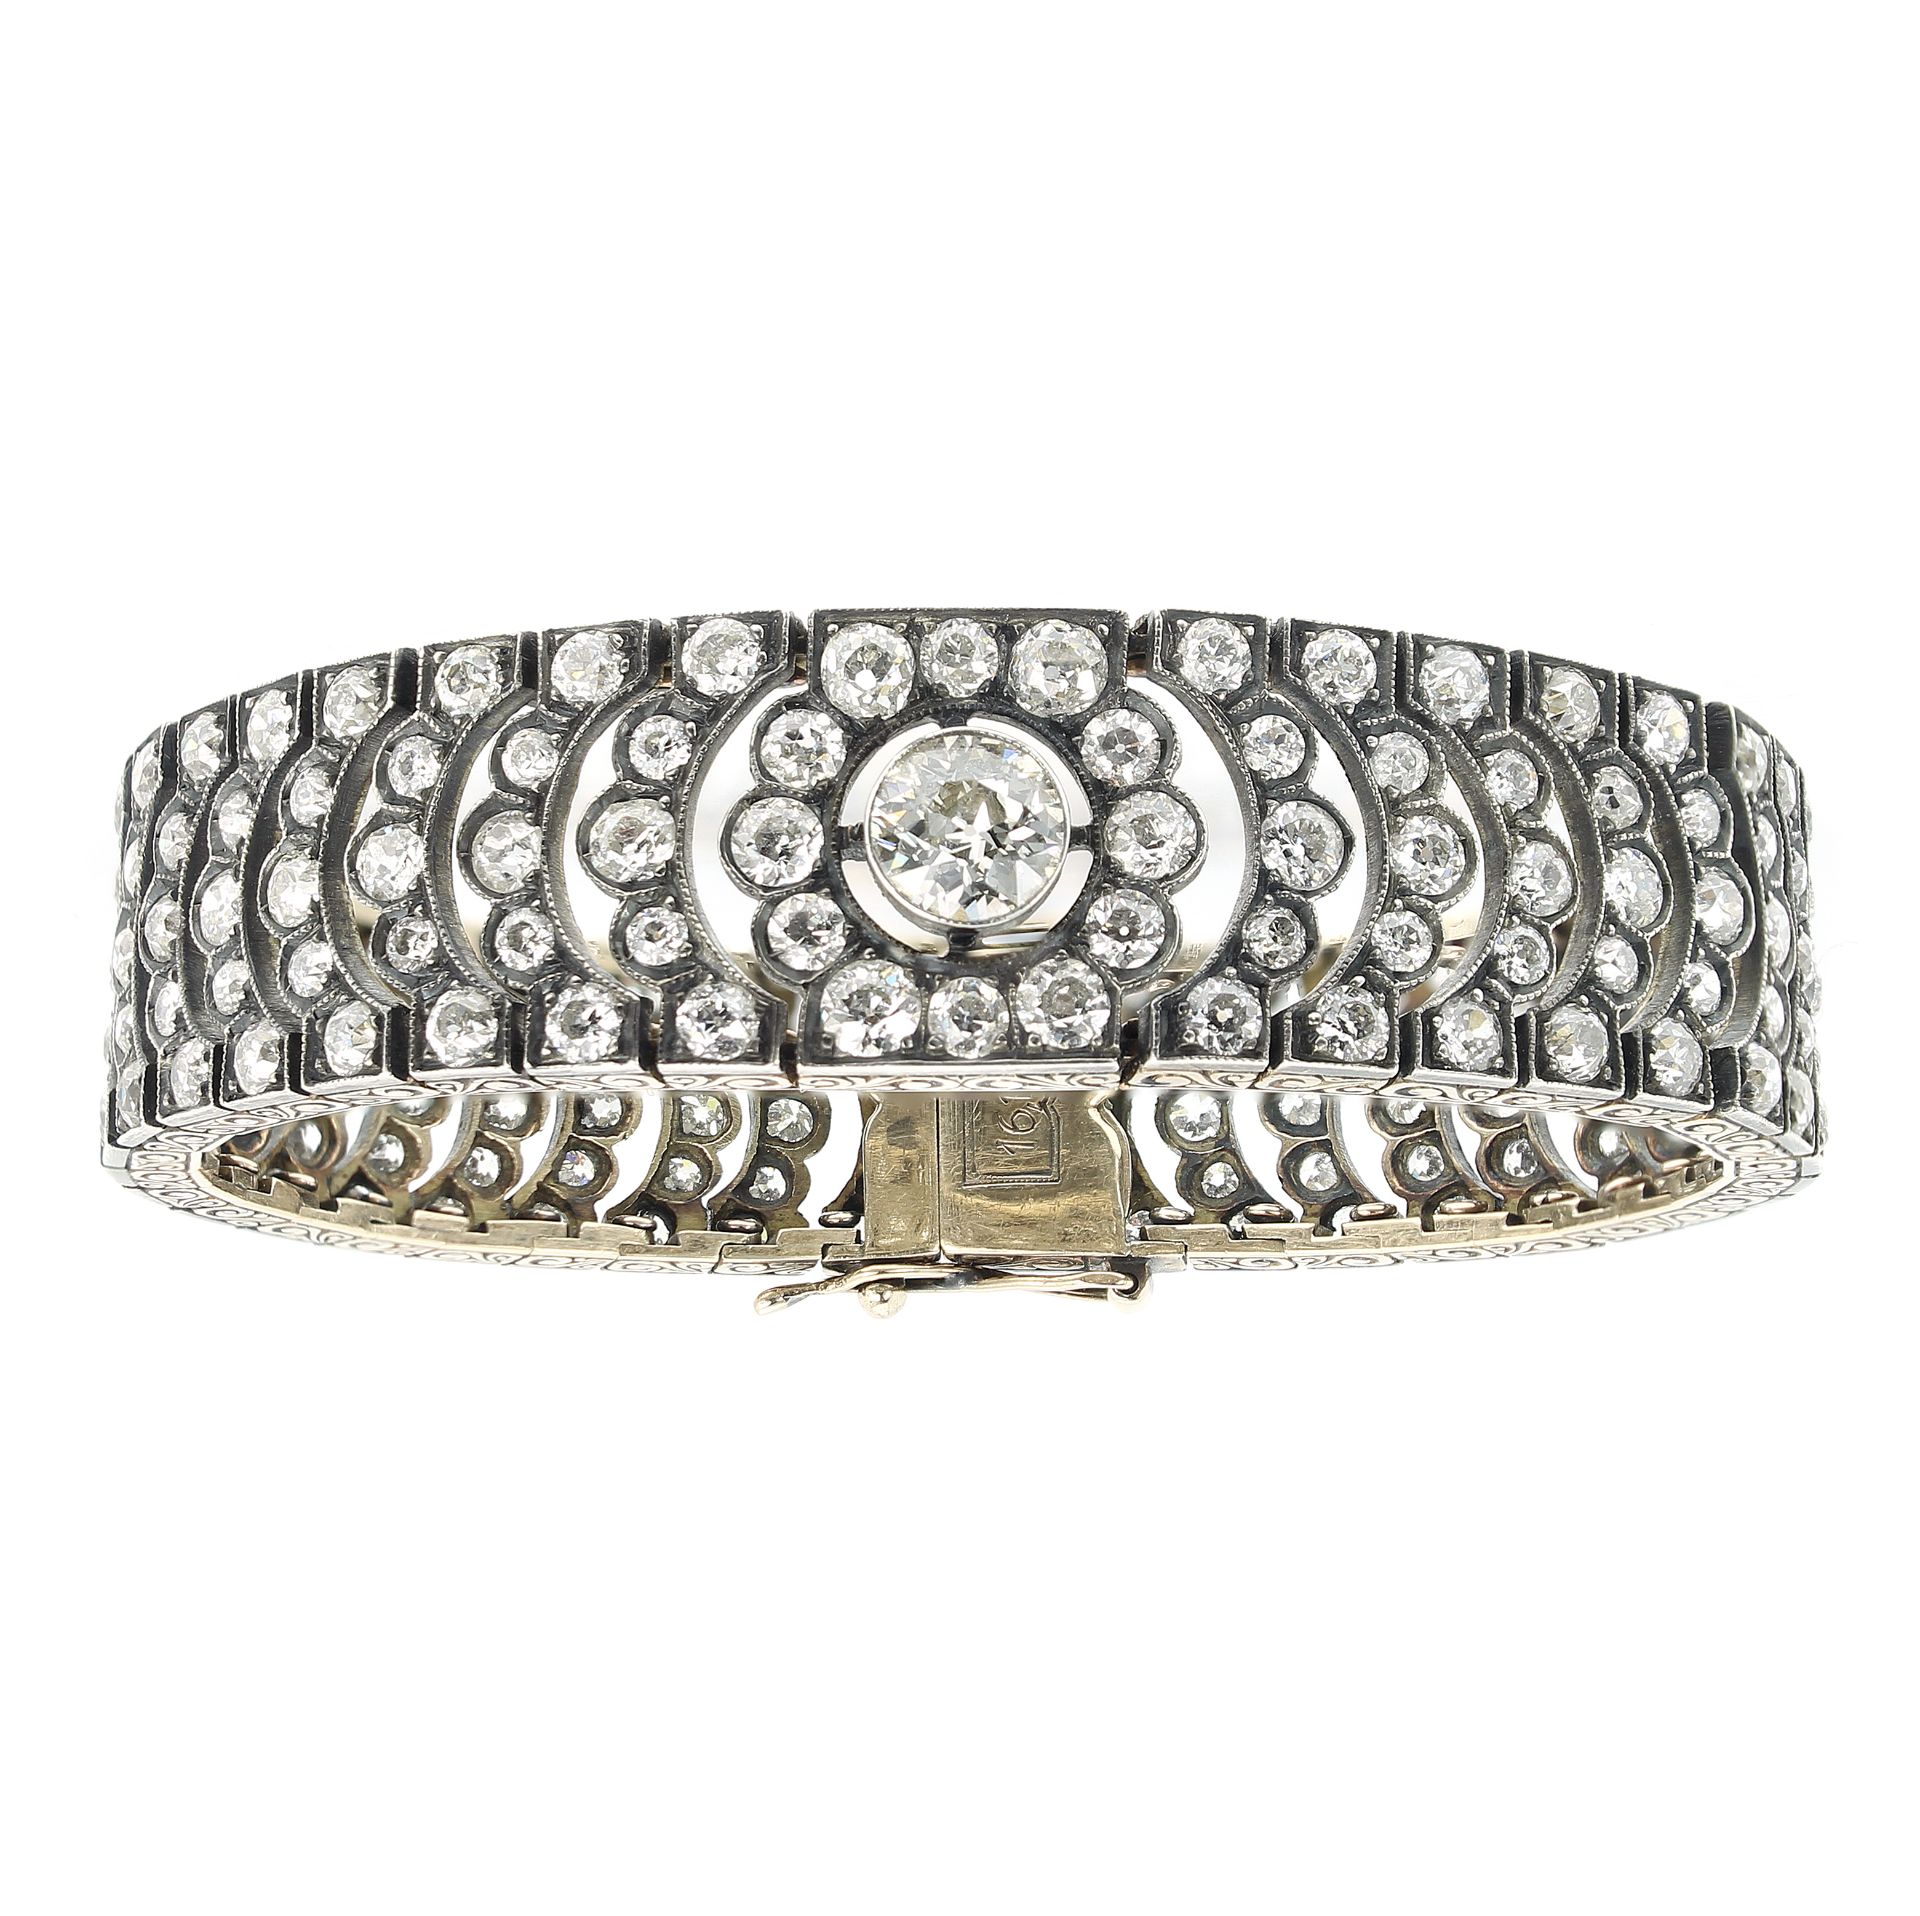 AN ANTIQUE 16.15 CARAT DIAMOND BRACELET CIRCA 1880 in high carat yellow gold and silver, the